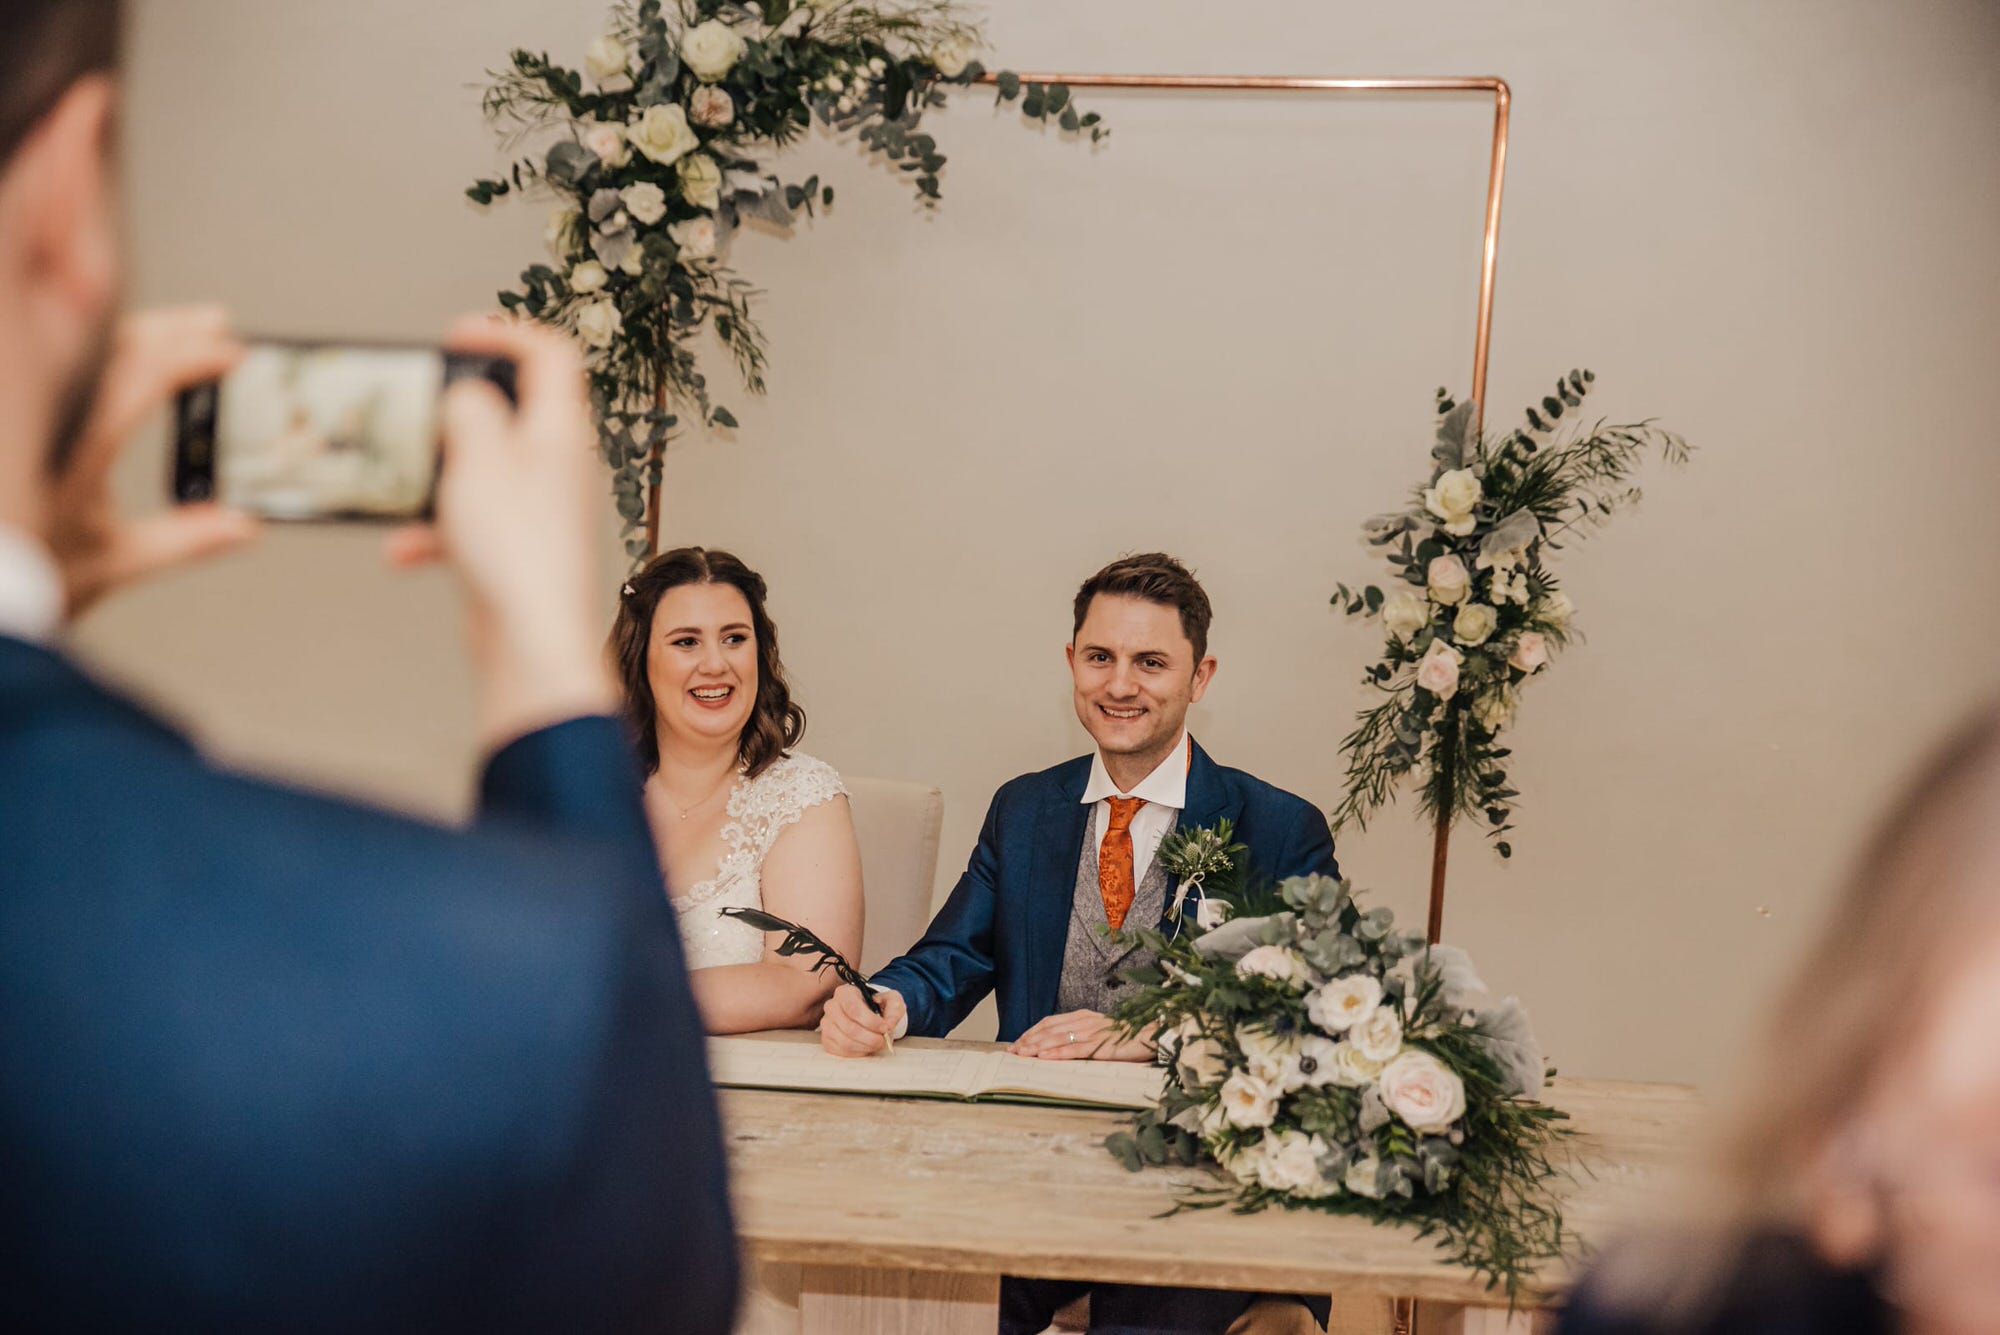 Lizzie and Gareths wedding at The Milling Barn, Bluntswood Hall, Throcking Roshni Photography